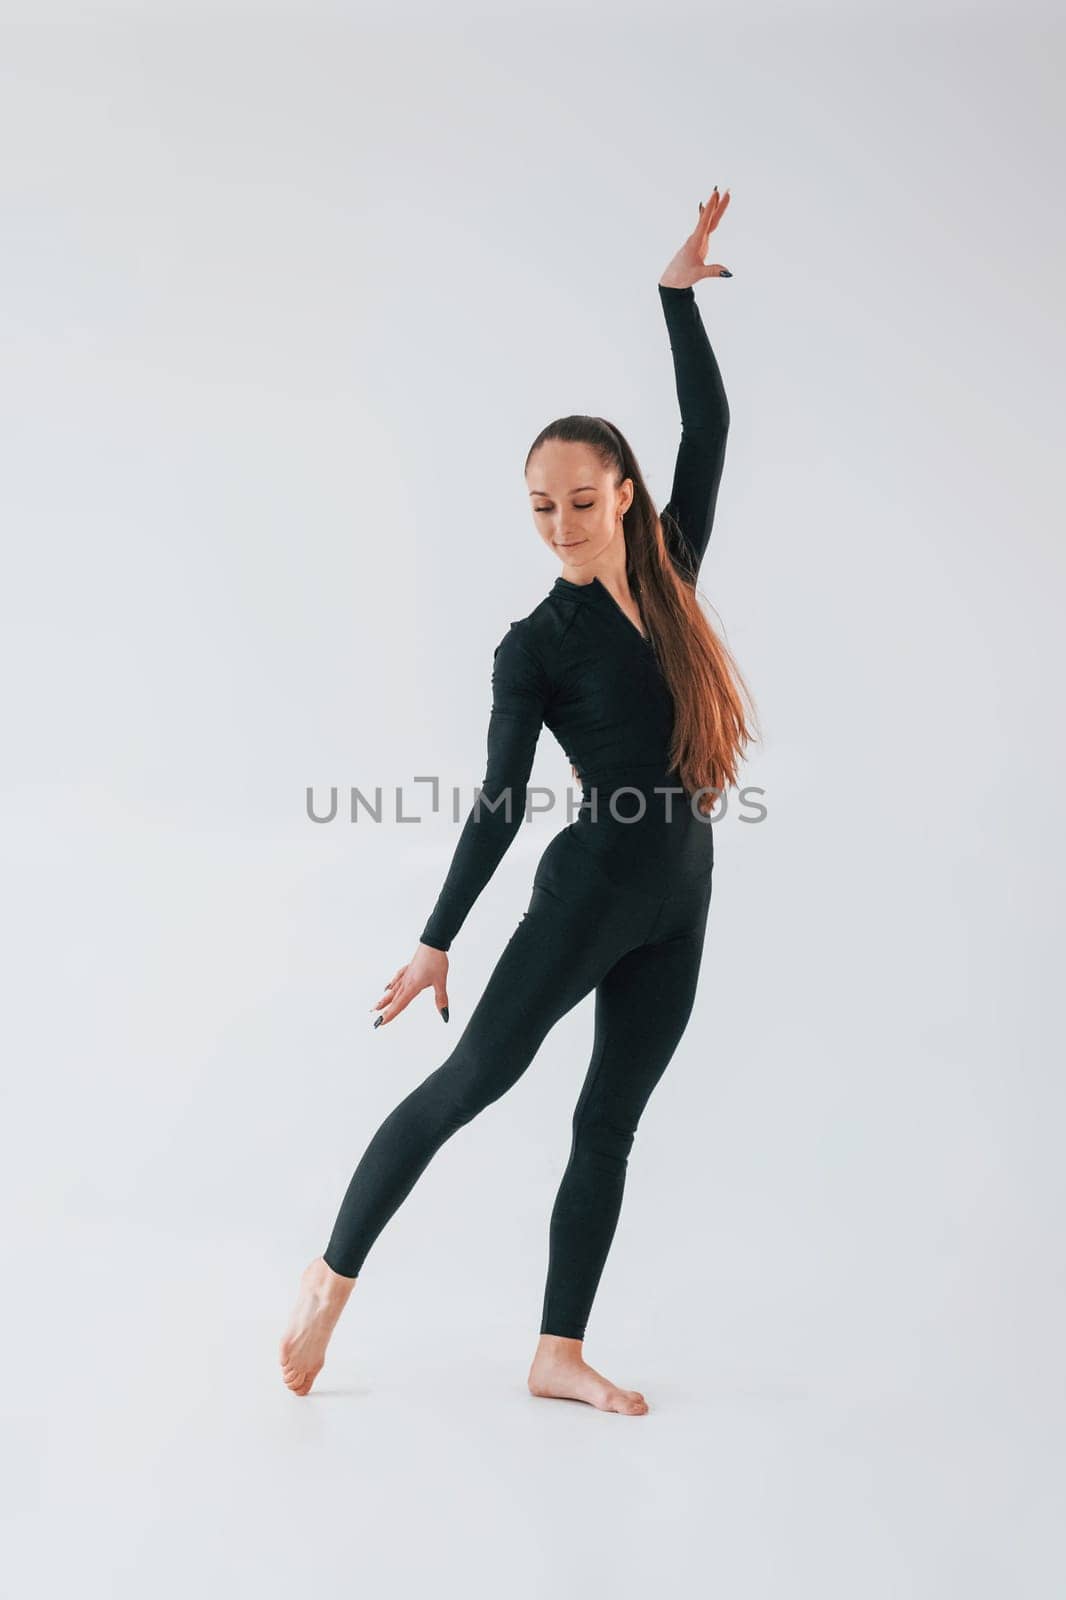 White background. Young woman in sportive clothes doing gymnastics indoors.